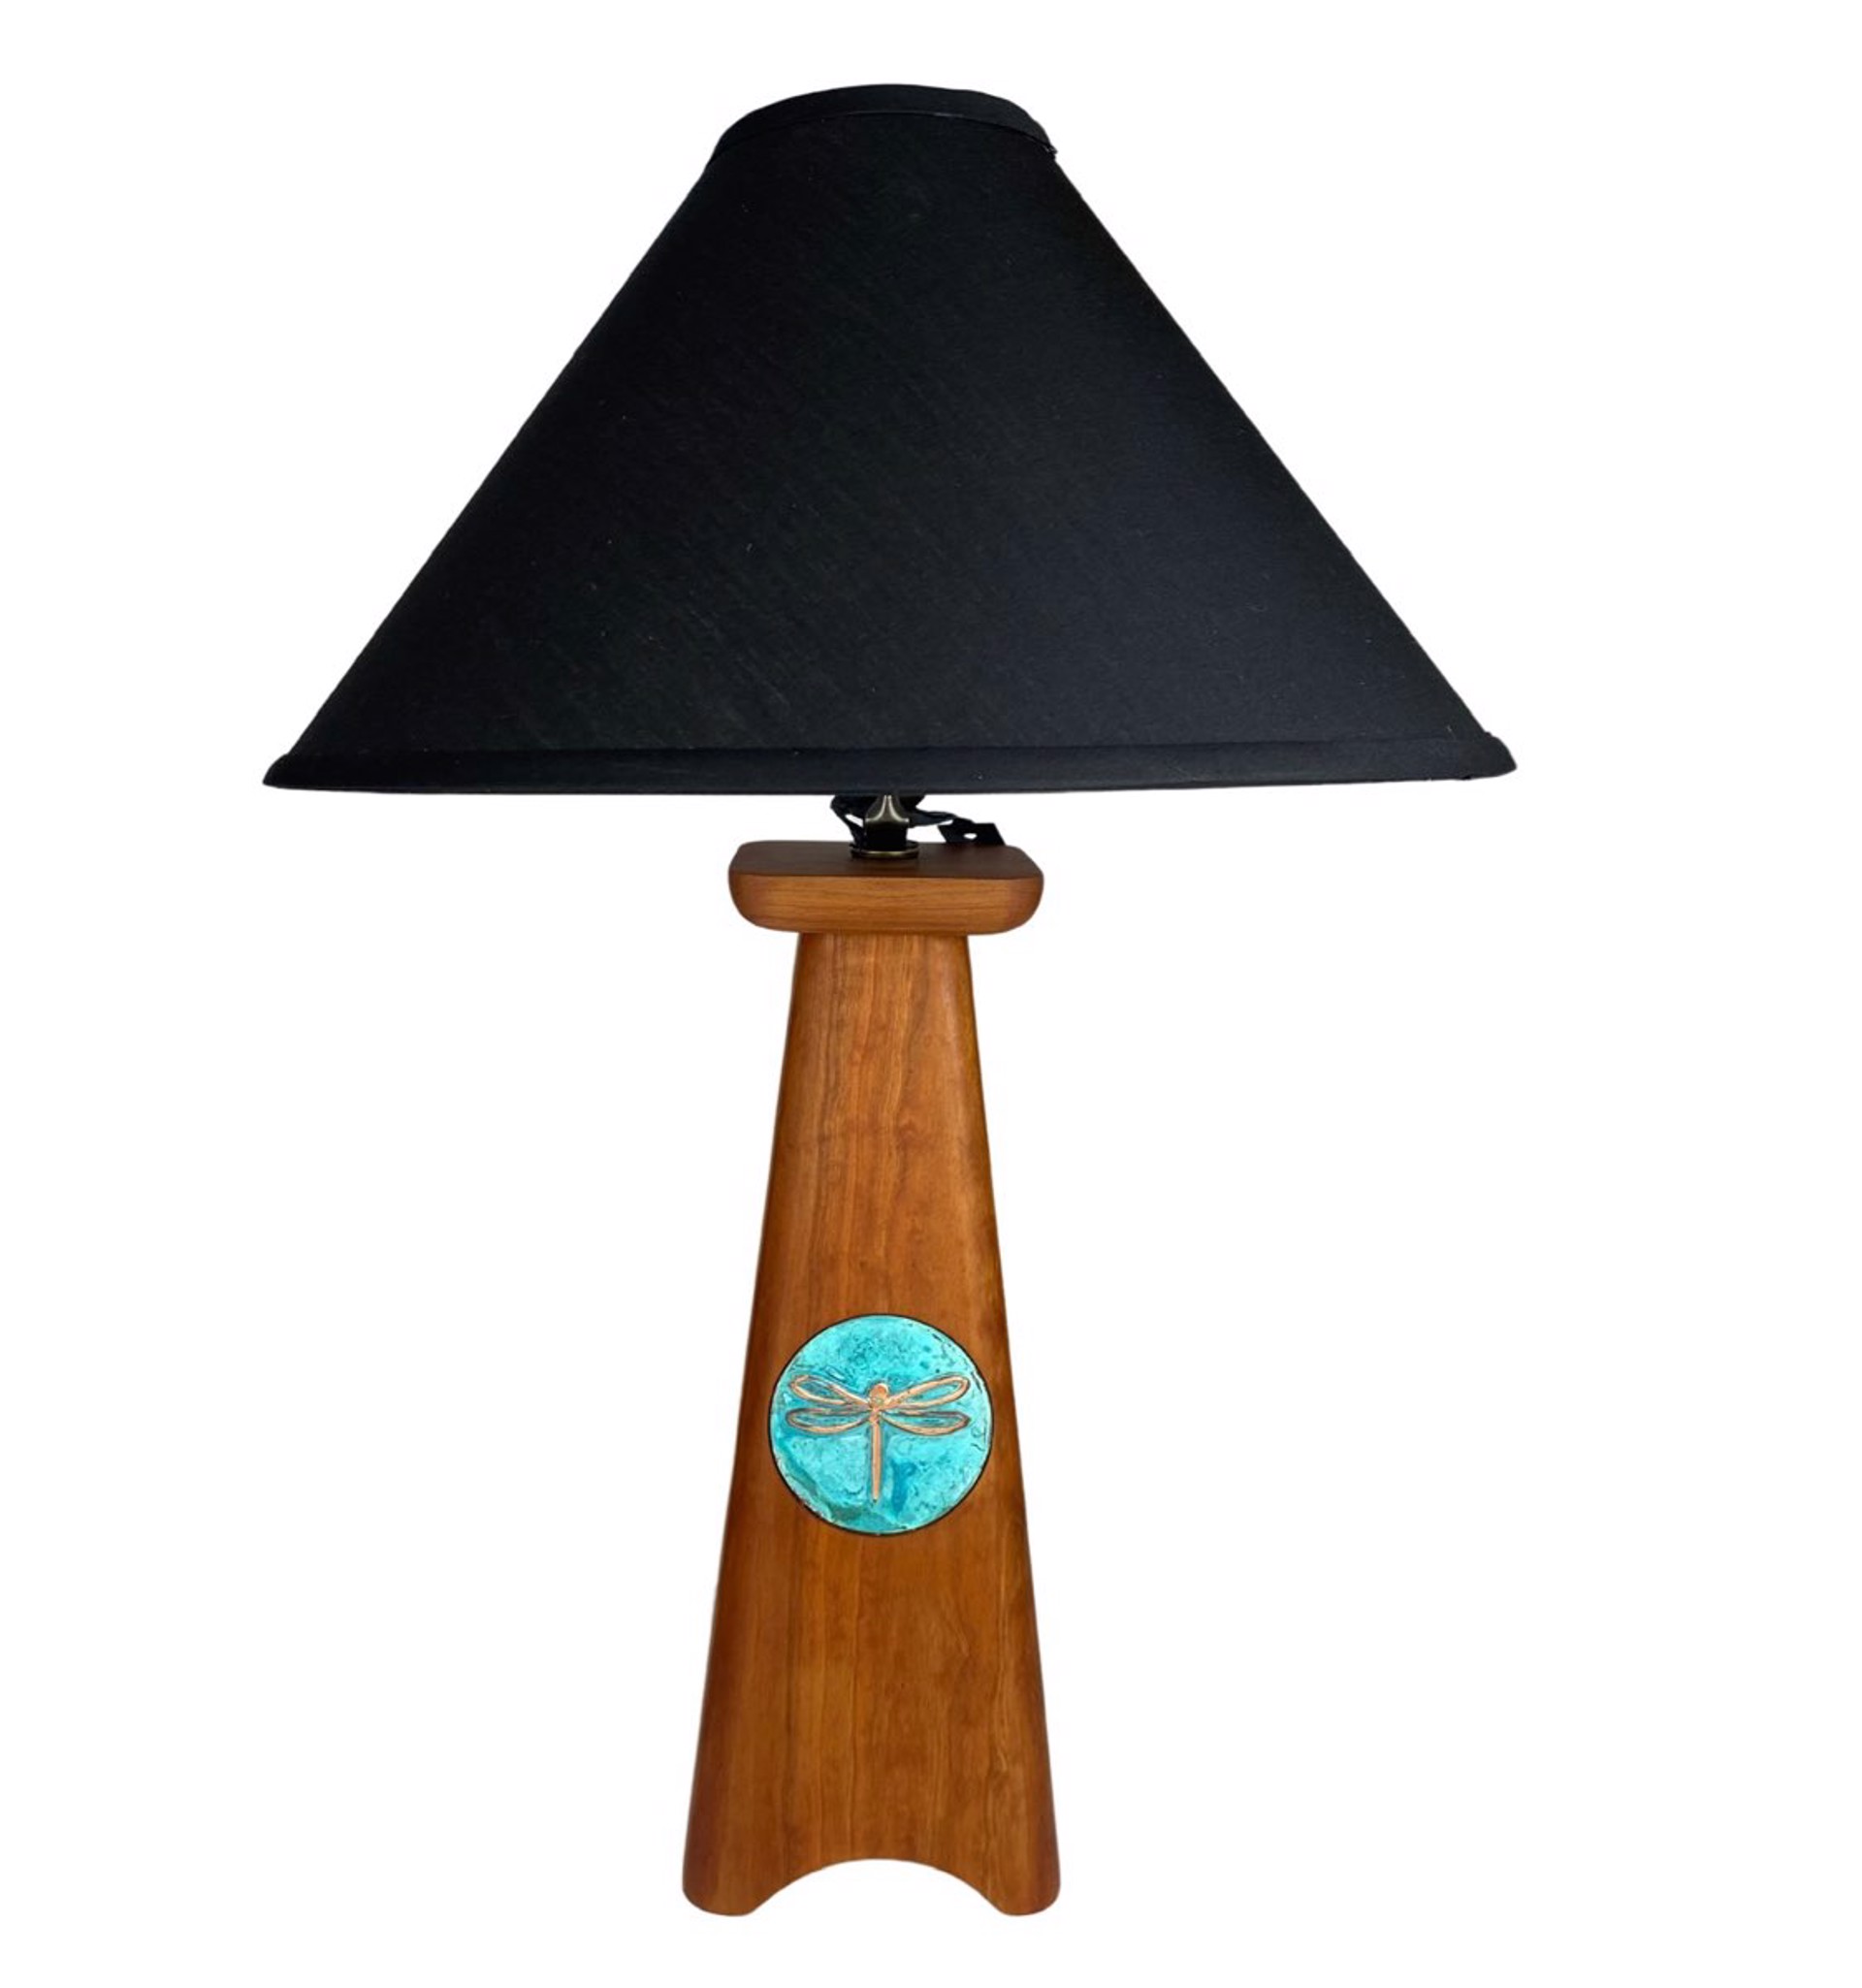 East of Appalachia Dragonfly Lamp by Sabbath Day Woods